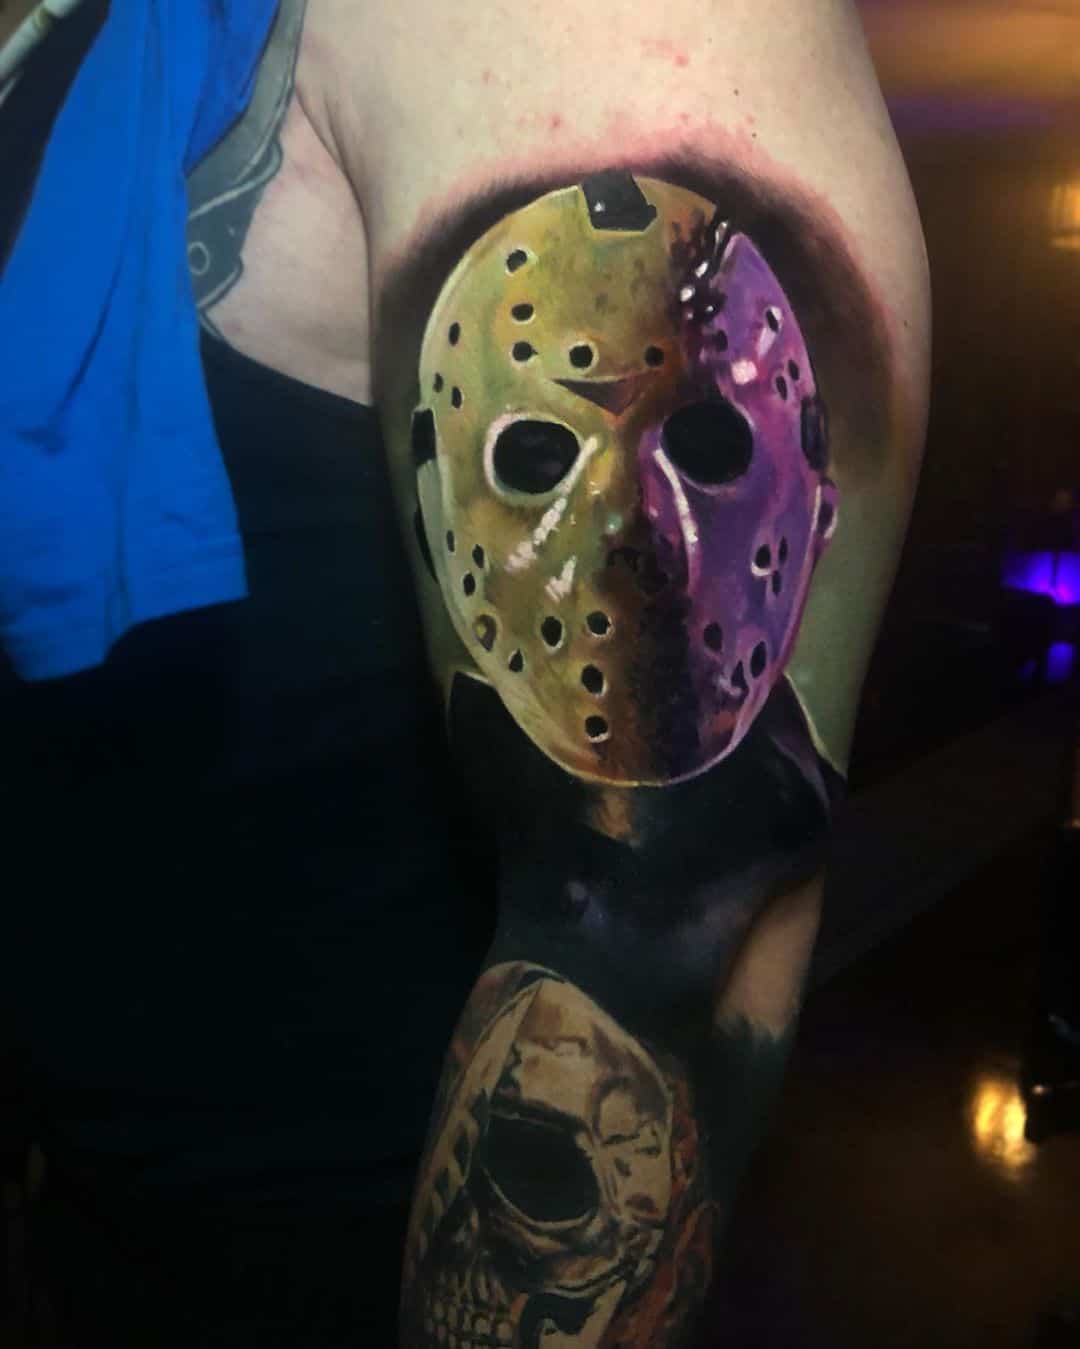 Jason Voorhees Tattoos: Meanings, Common Themes & More